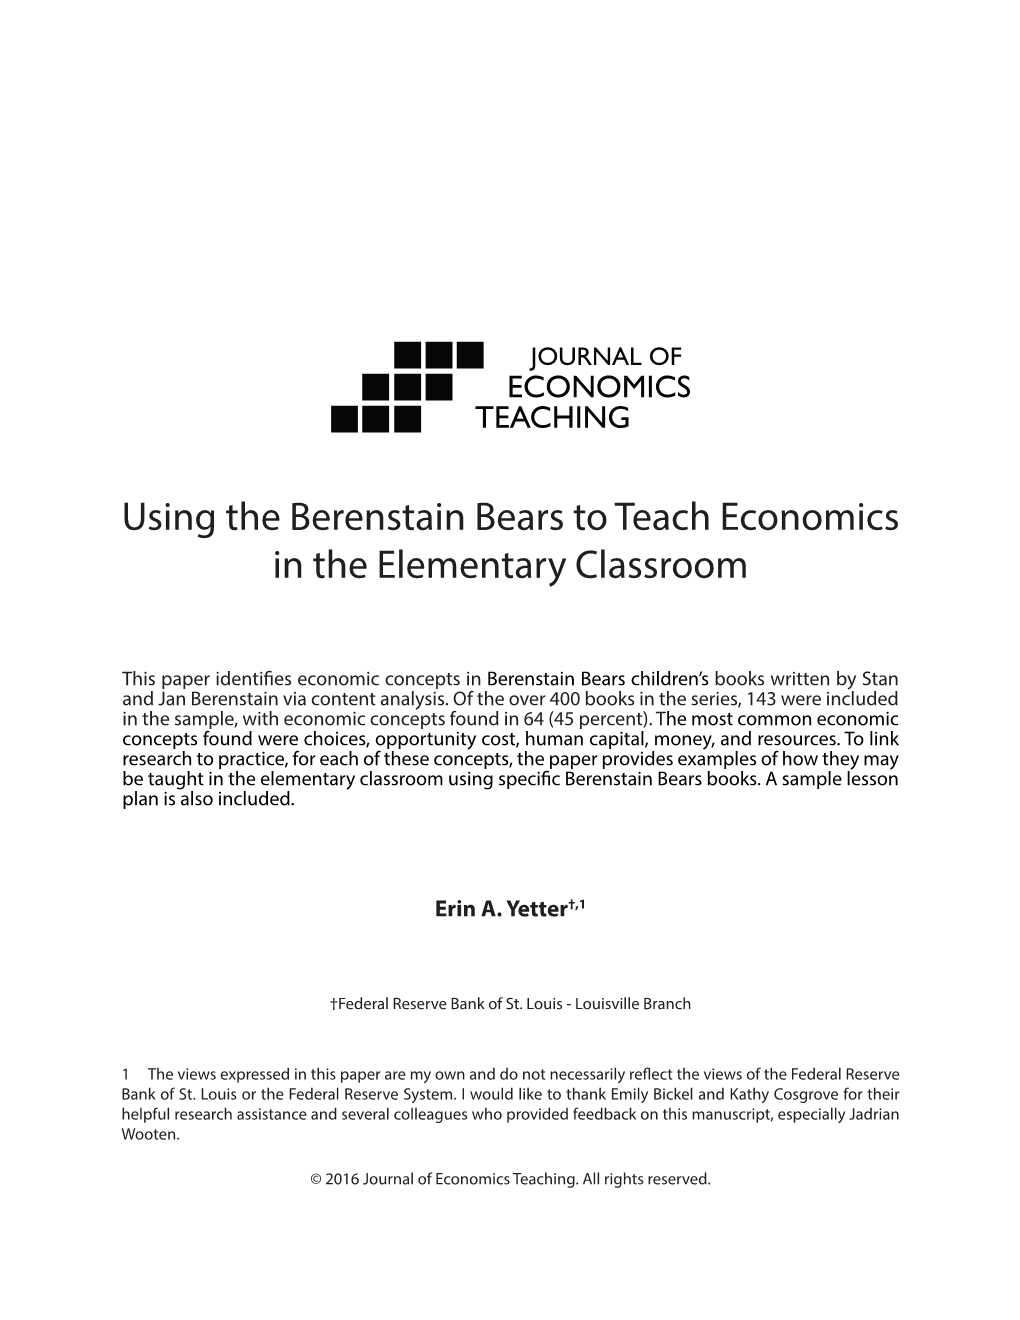 Using the Berenstain Bears to Teach Economics in the Elementary Classroom